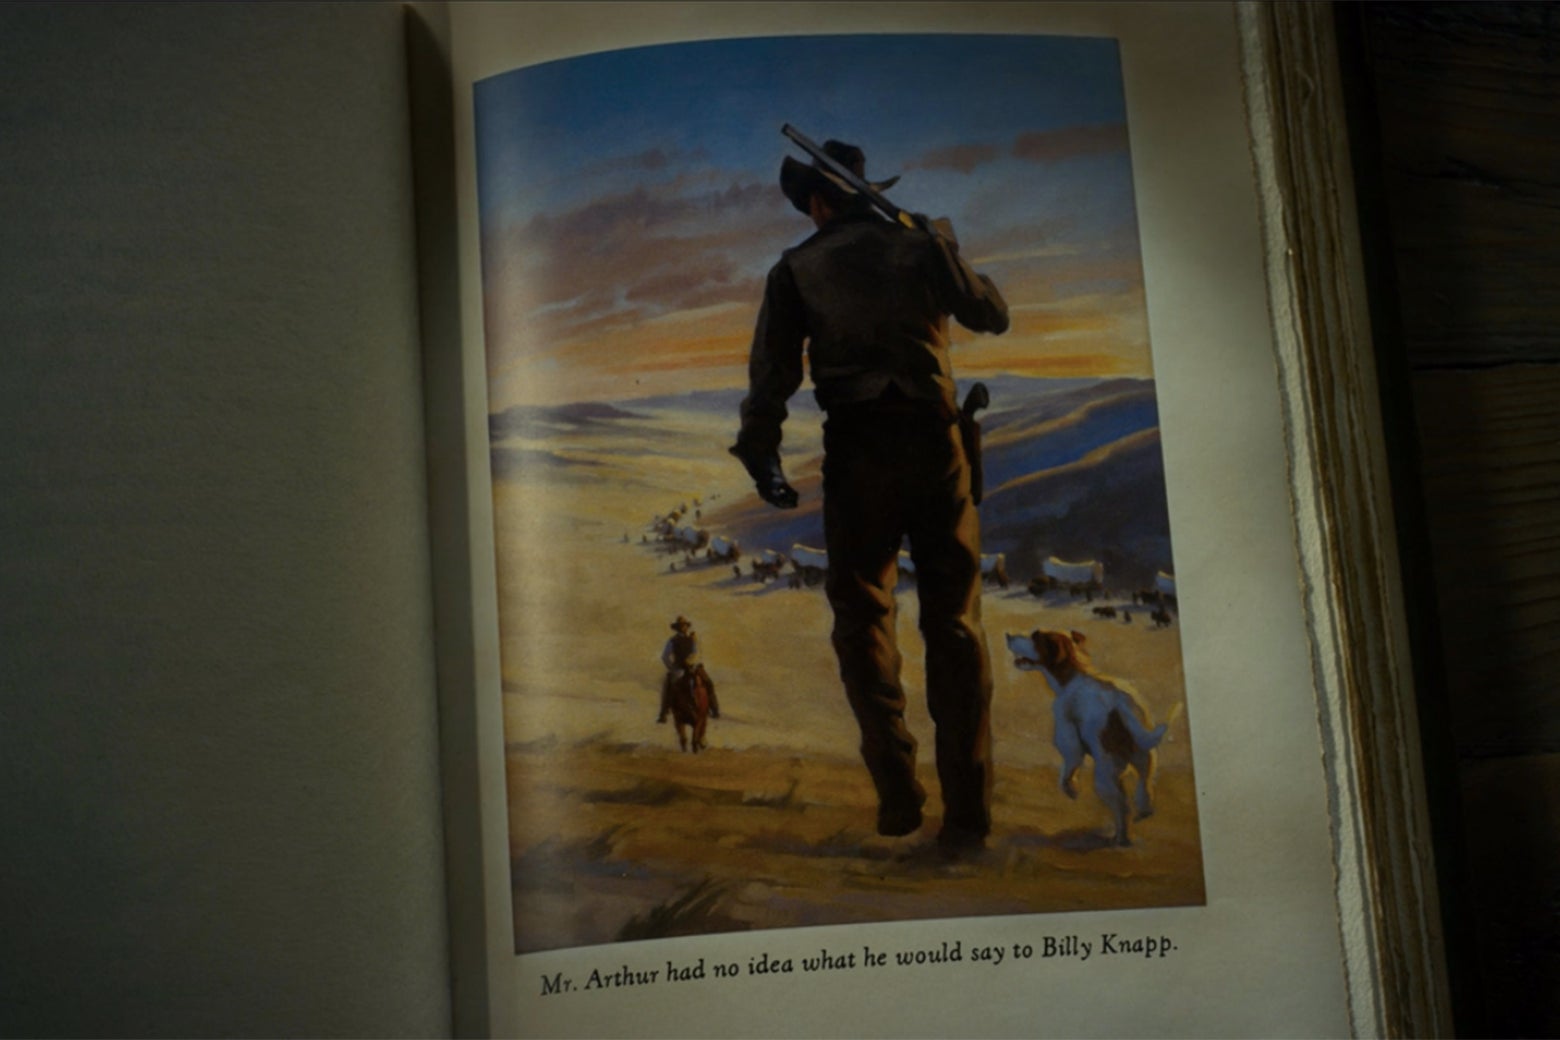 An illustration of a cowboy cresting a hill and walking away from the viewer toward a distant wagon train.